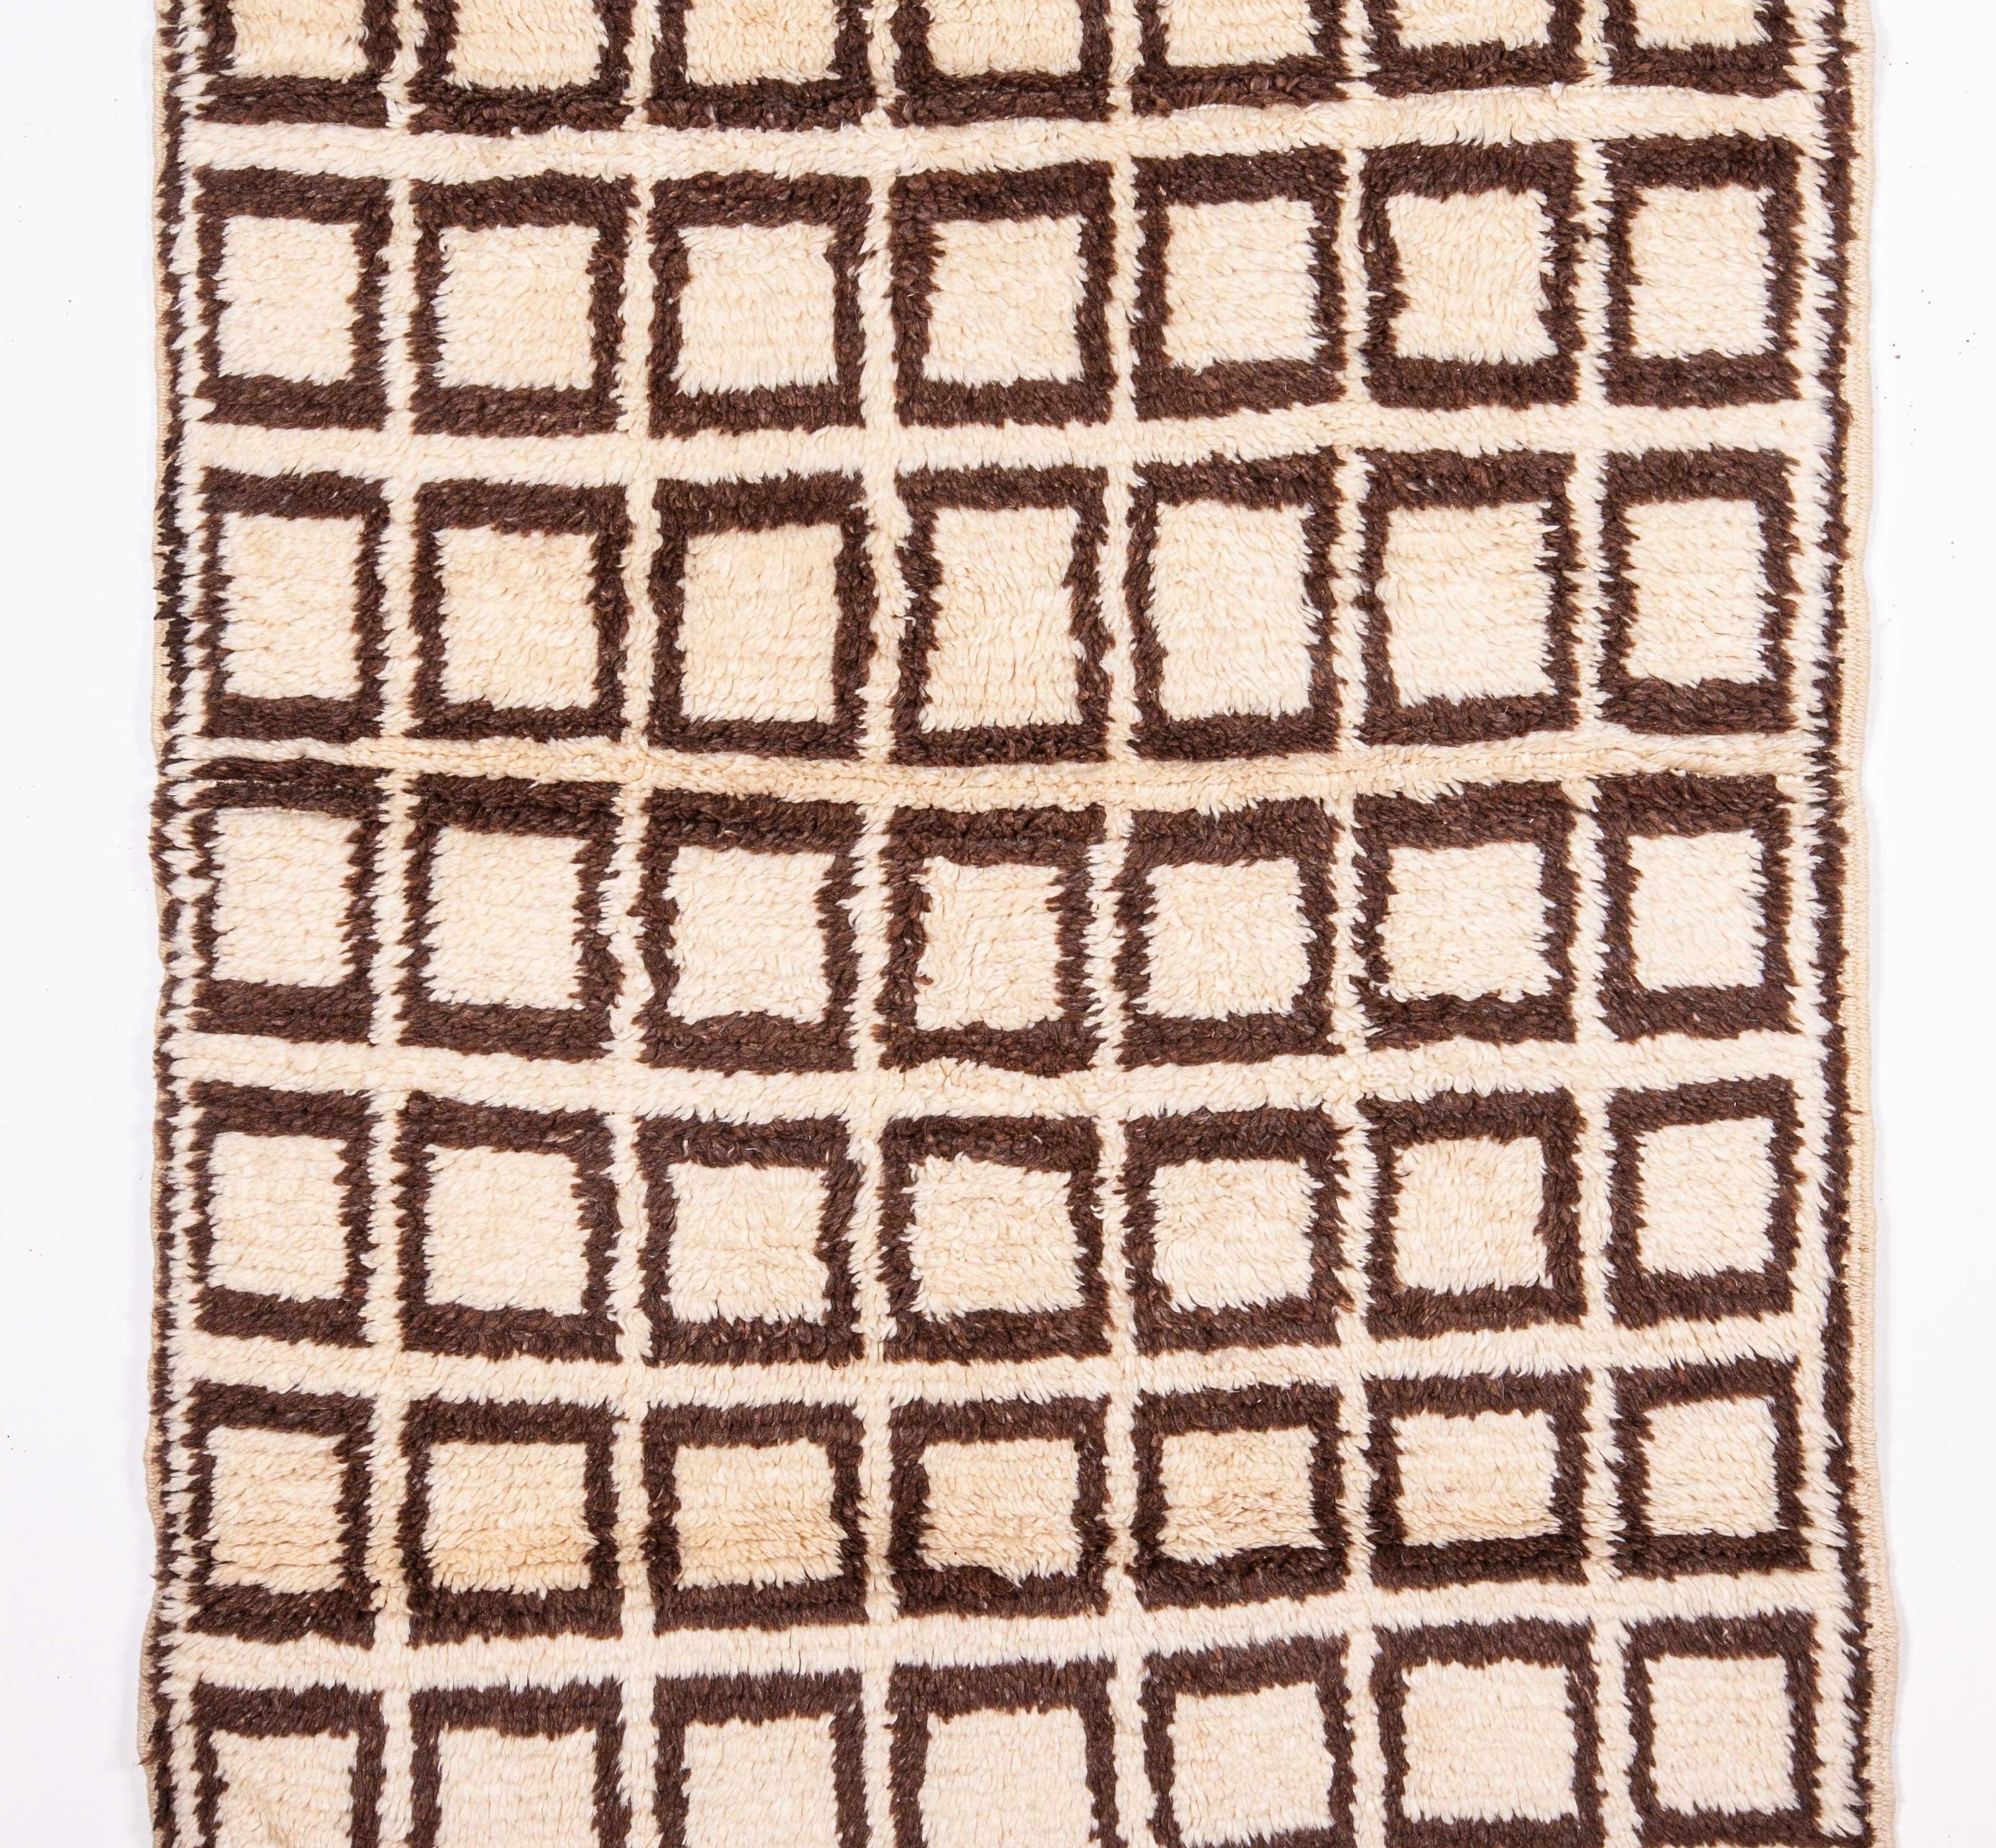 Pure wool. In good condition, late 20th century.